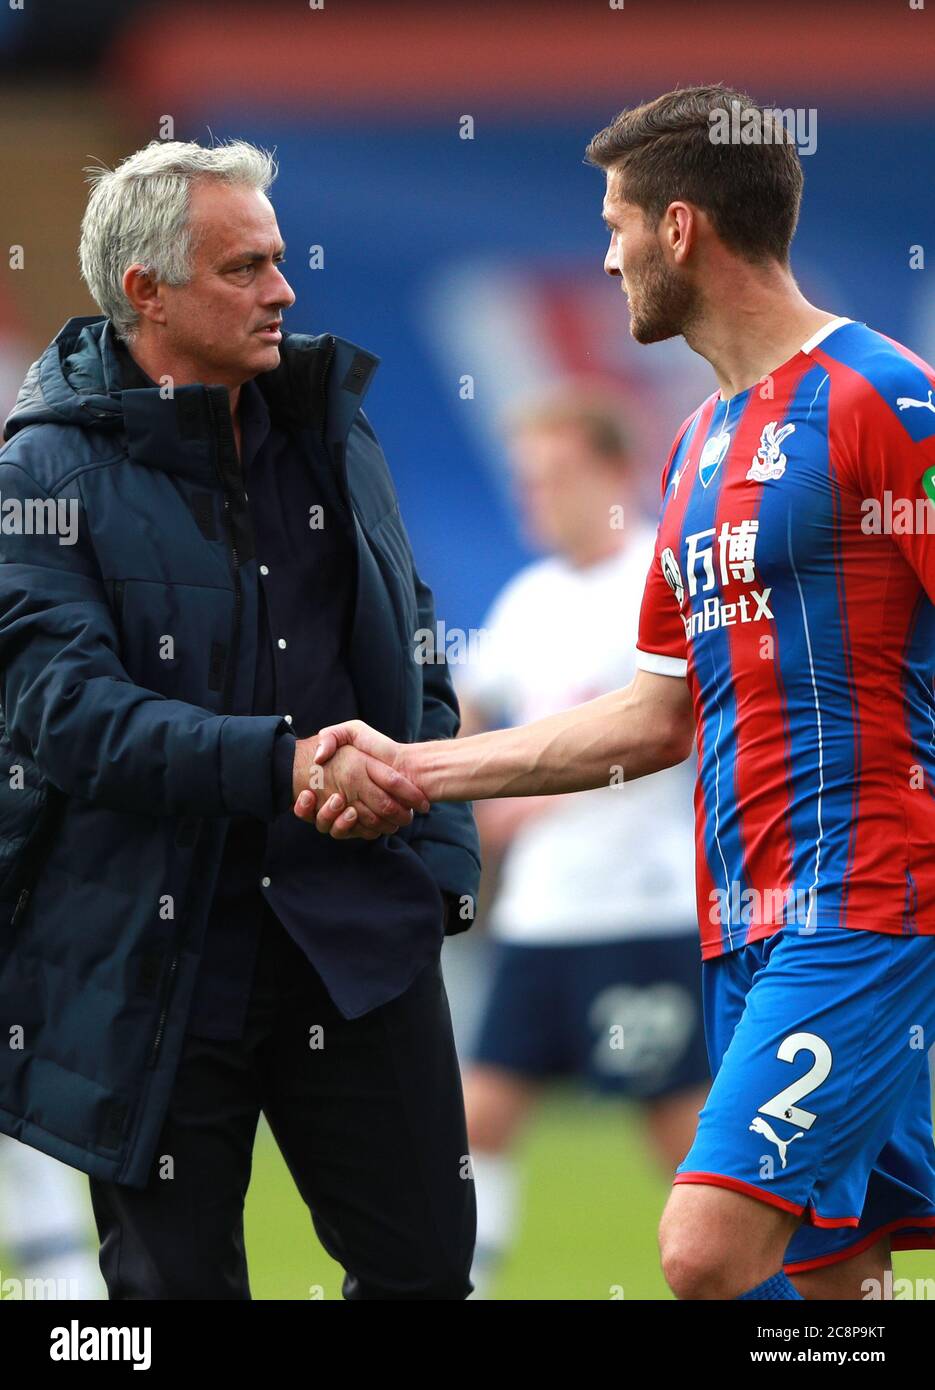 Tottenham Hotspur manager Jose Mourinho greets Crystal Palace's Joel Ward after the final whistle during the Premier League match at Selhurst Park, London. Stock Photo